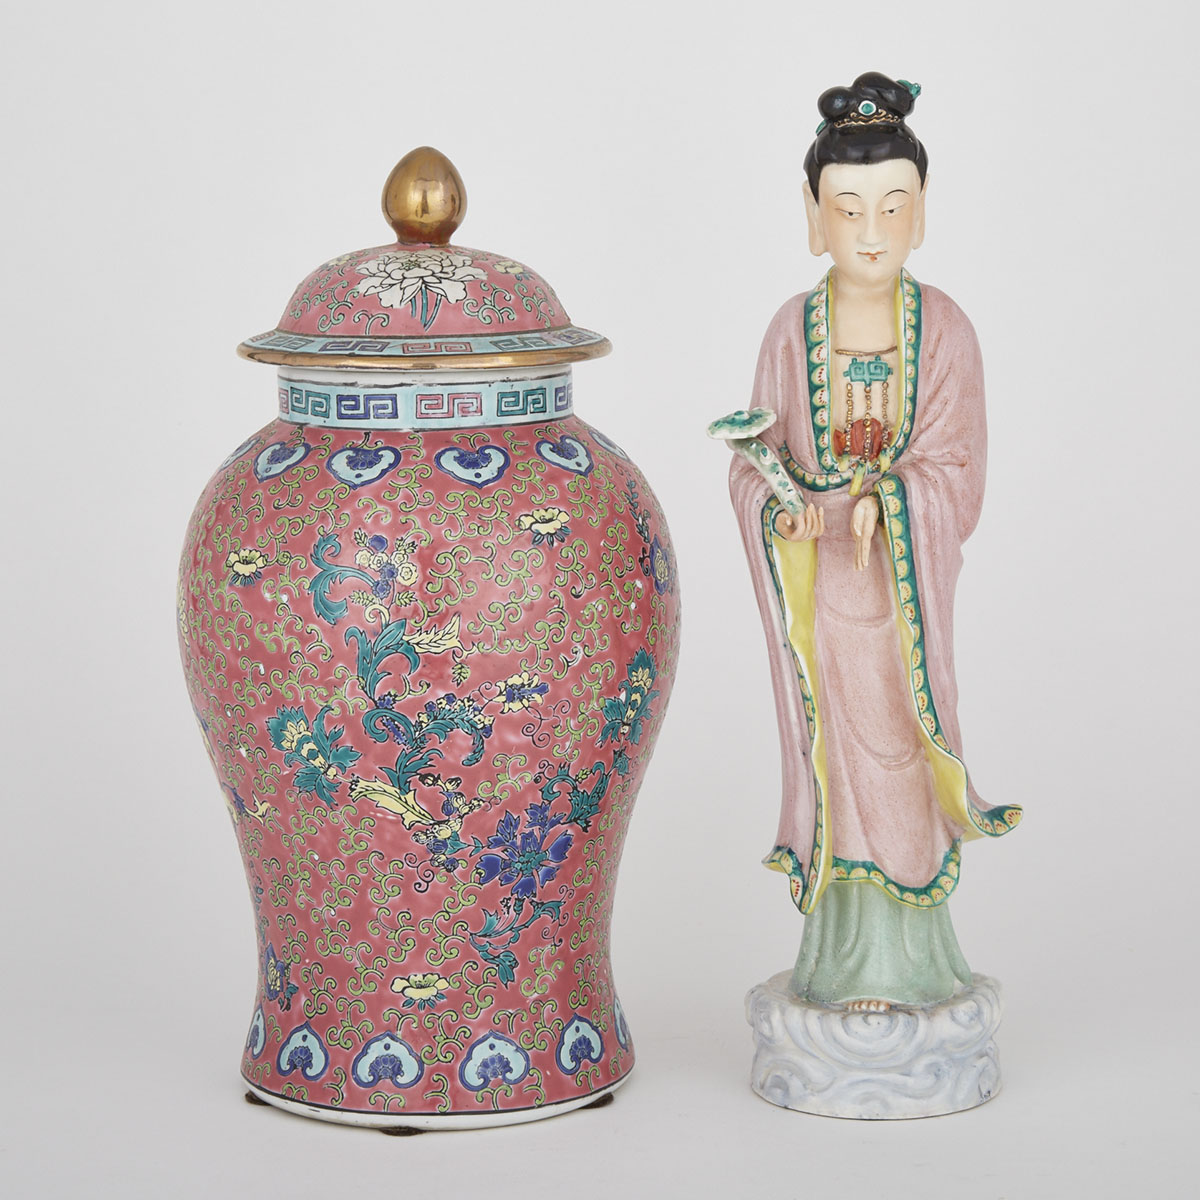 A Famille Rose Covered Jar and a Famille Rose Figure